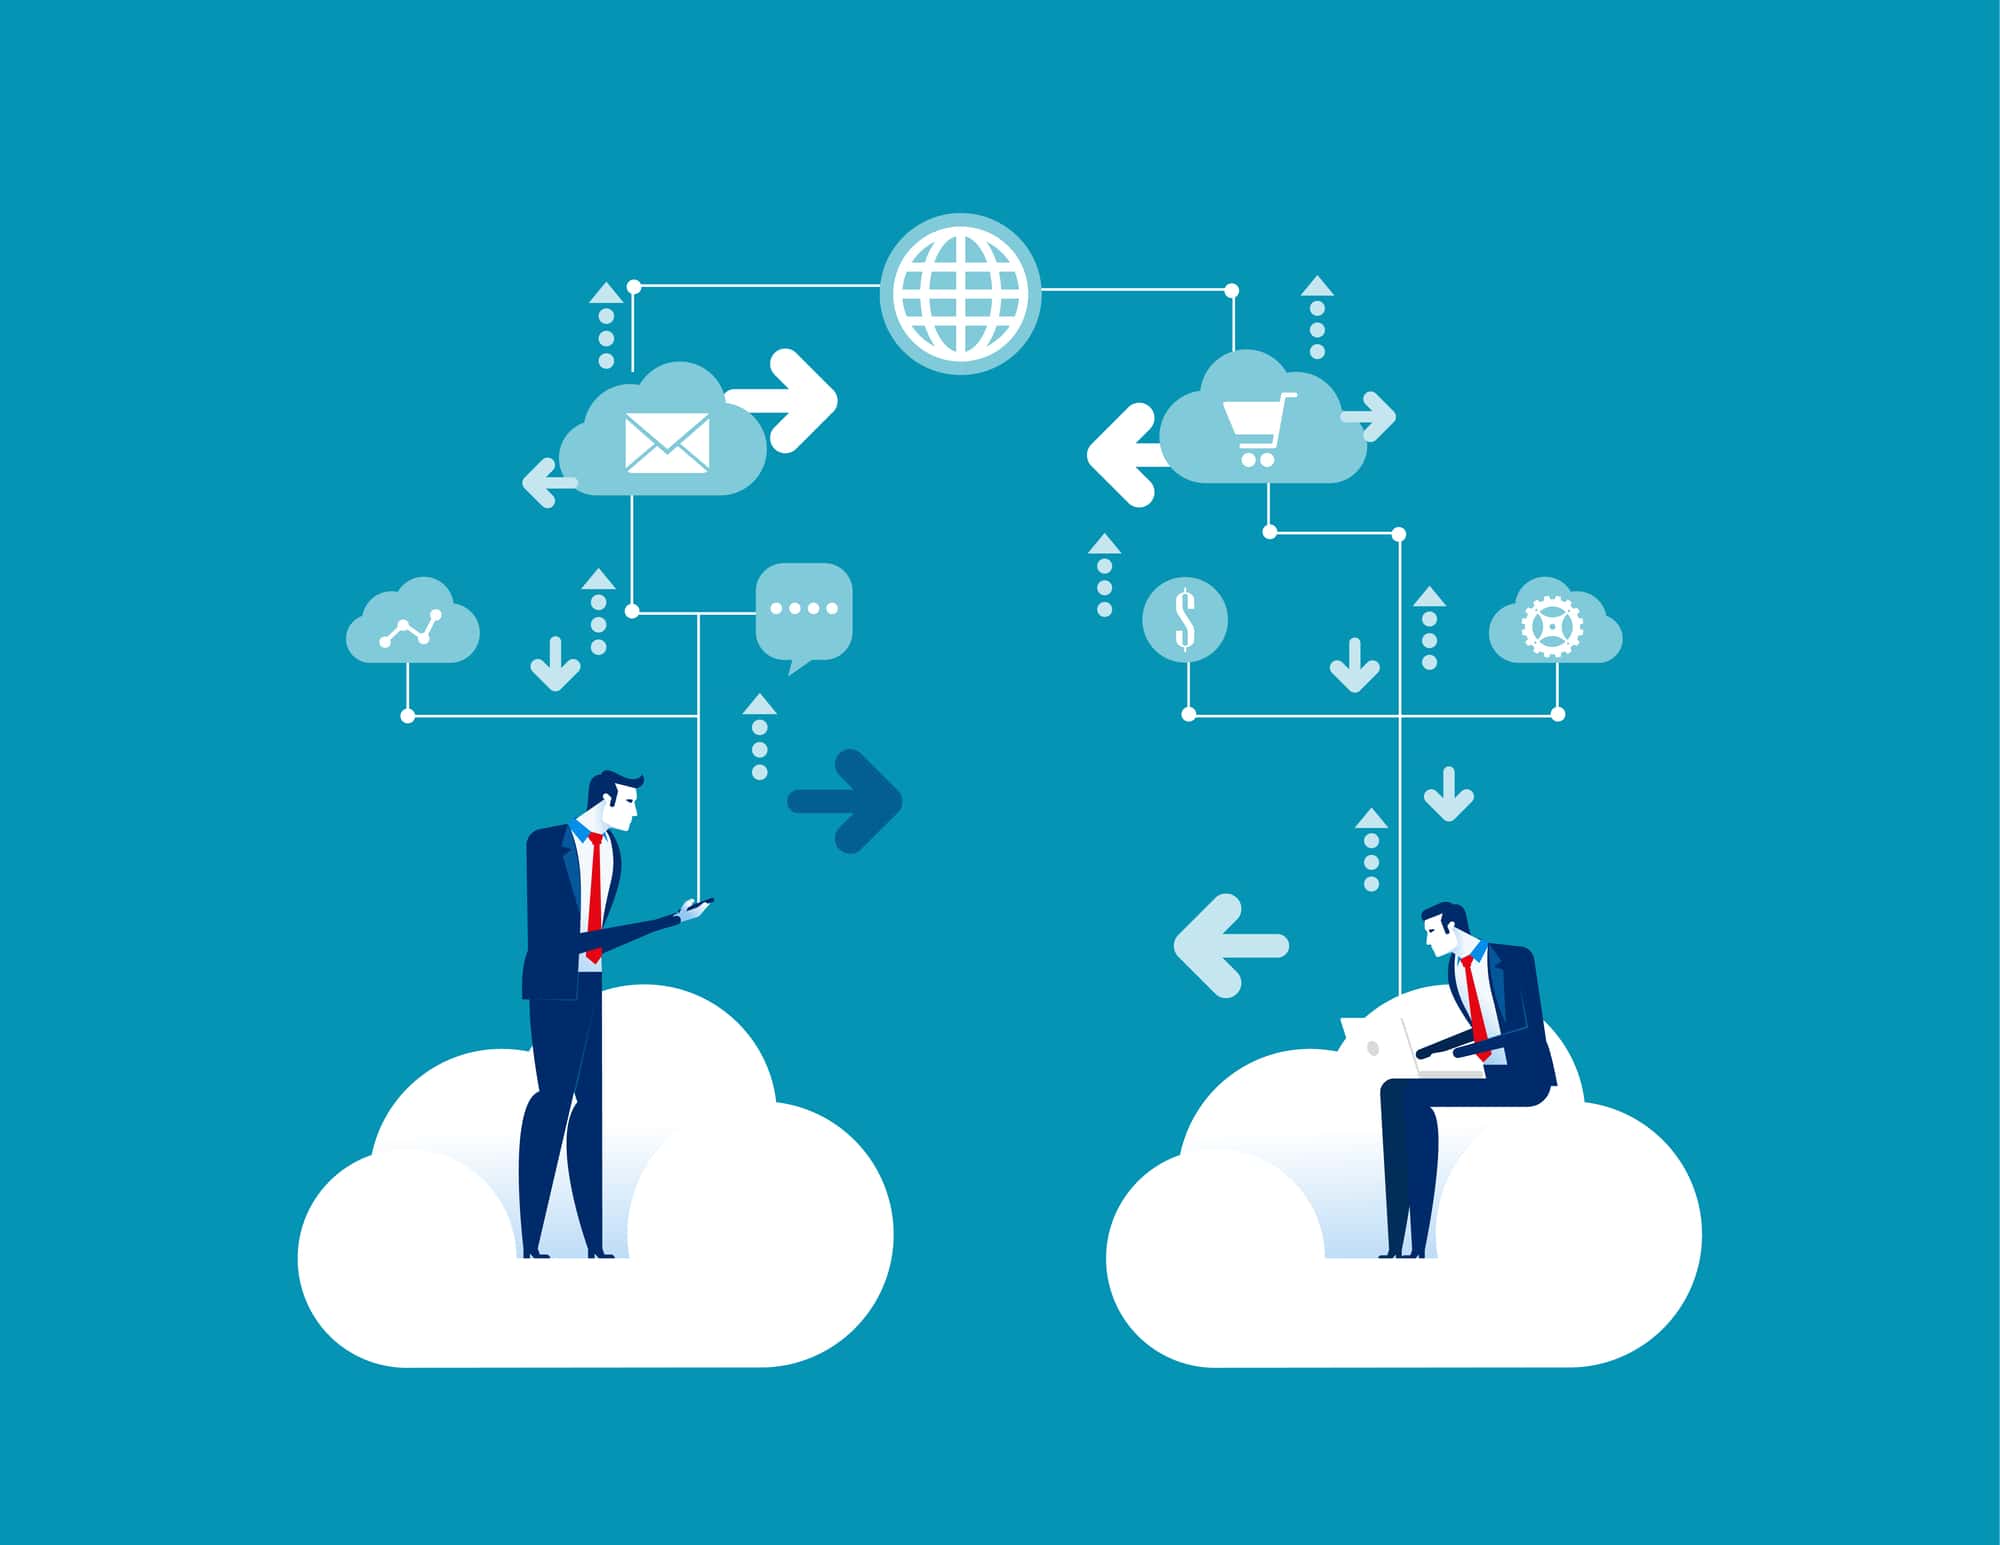 Vector of two men on clouds with technology floating between them.